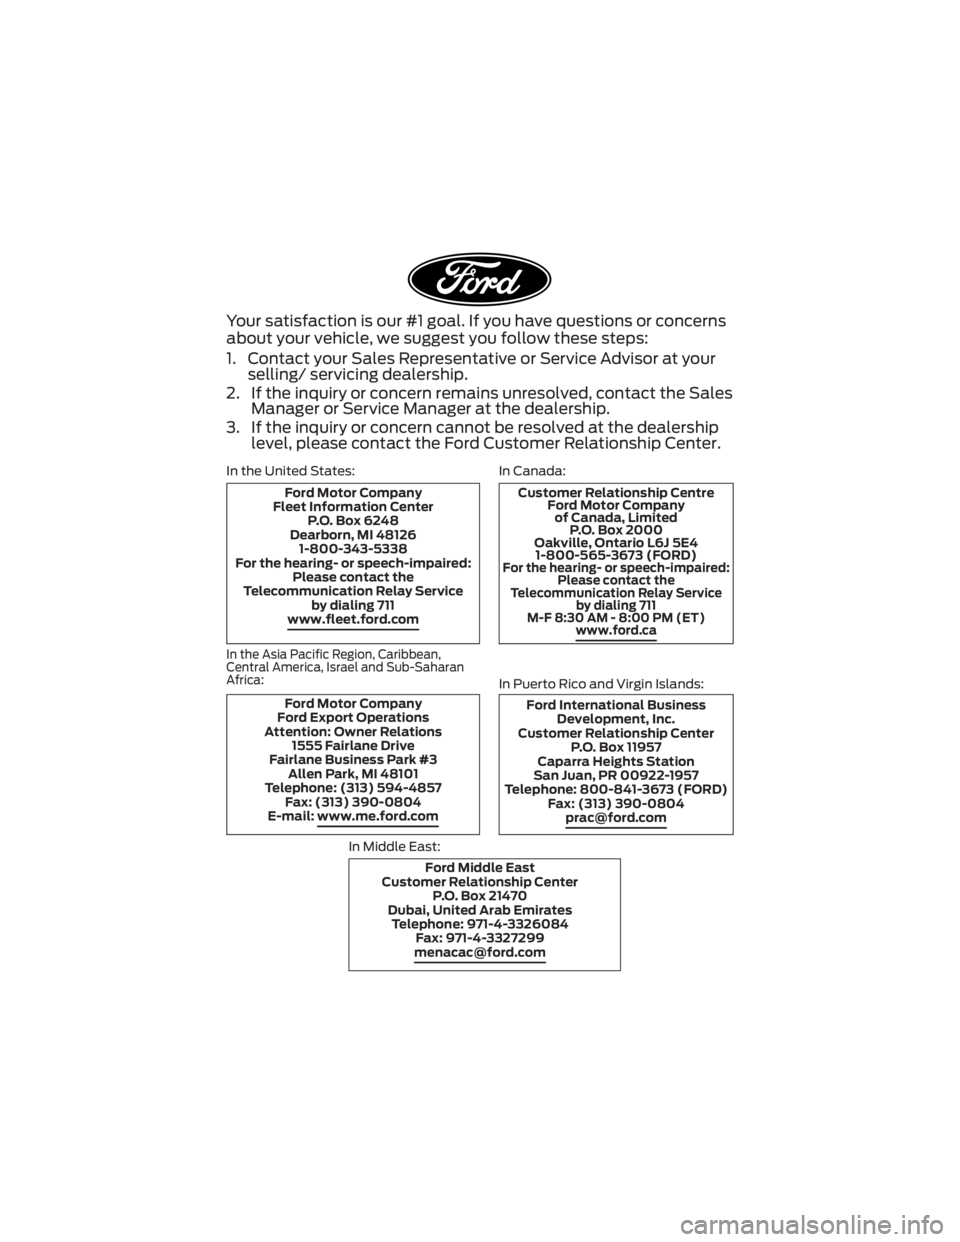 FORD F-59 2022  Warranty Guide Your satisfaction is our #1 goal. If you have questions or concerns
about your vehicle, we suggest you follow these steps:
1. Contact your Sales Representative or Service Advisor at yourselling/ servi